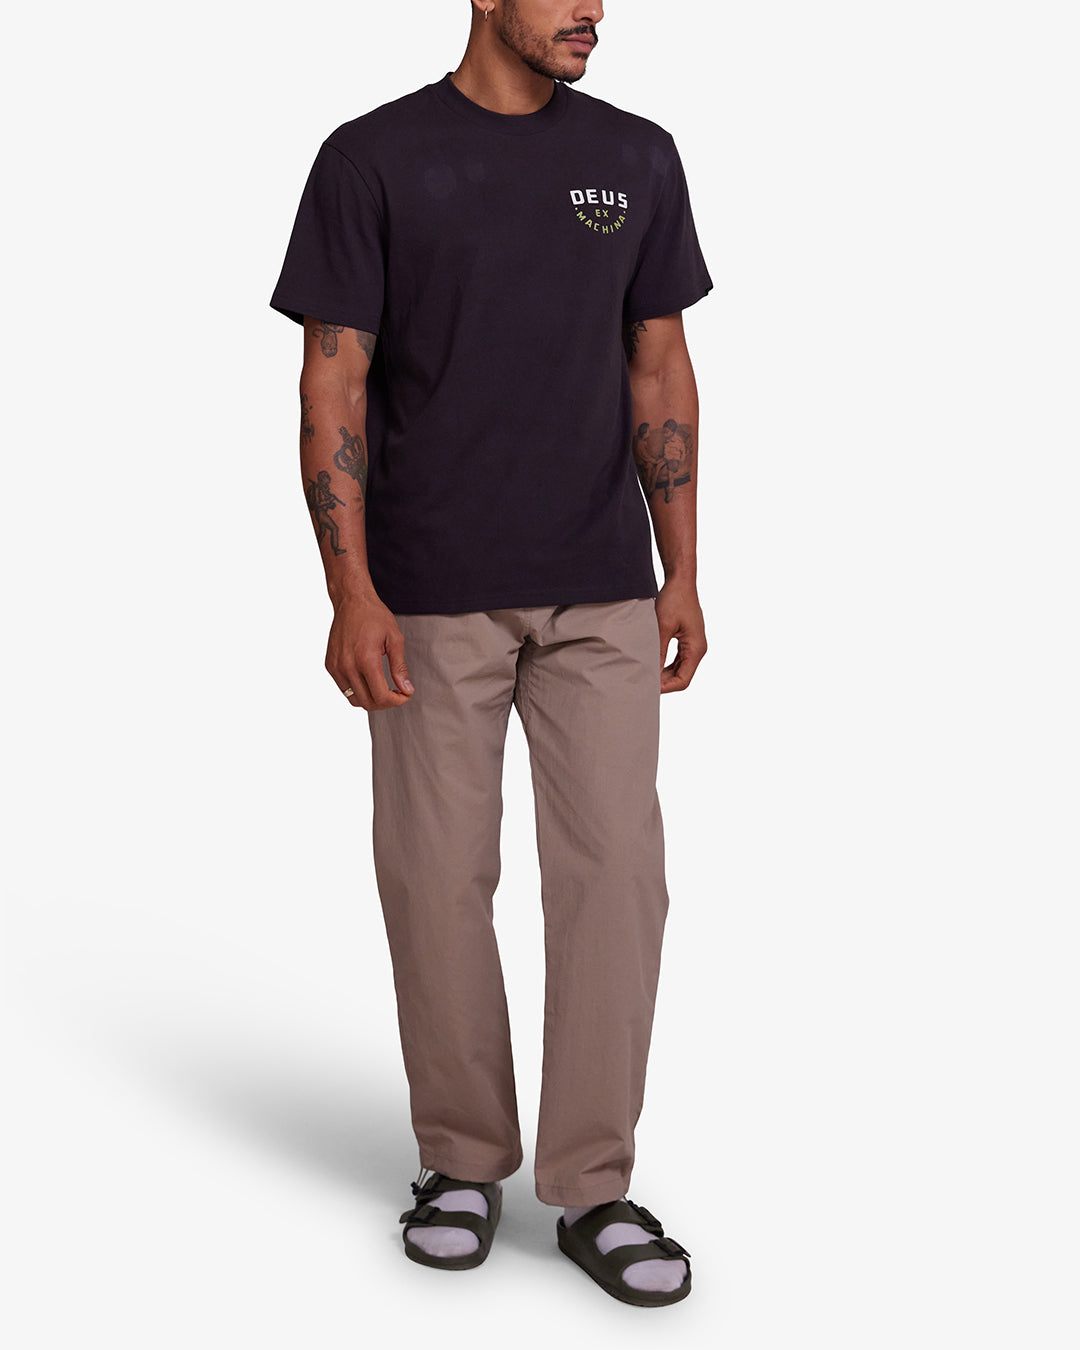 Out Doors Tee - Anthracite|Model